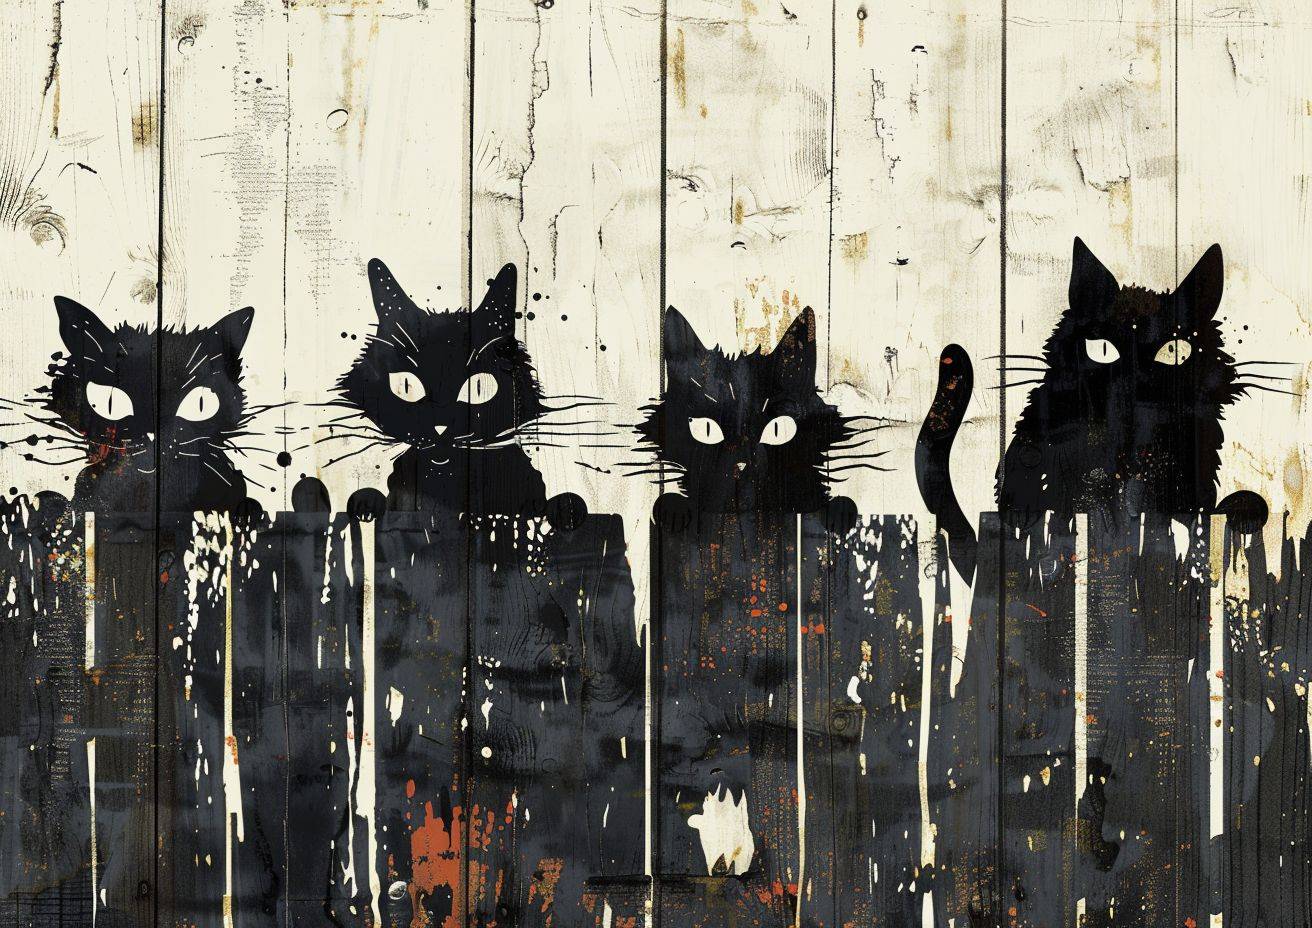 Simplified cartoon image, children's painting of cats on a wooden fence, white paint, wood texture, negative space, datamoshing glitch effect